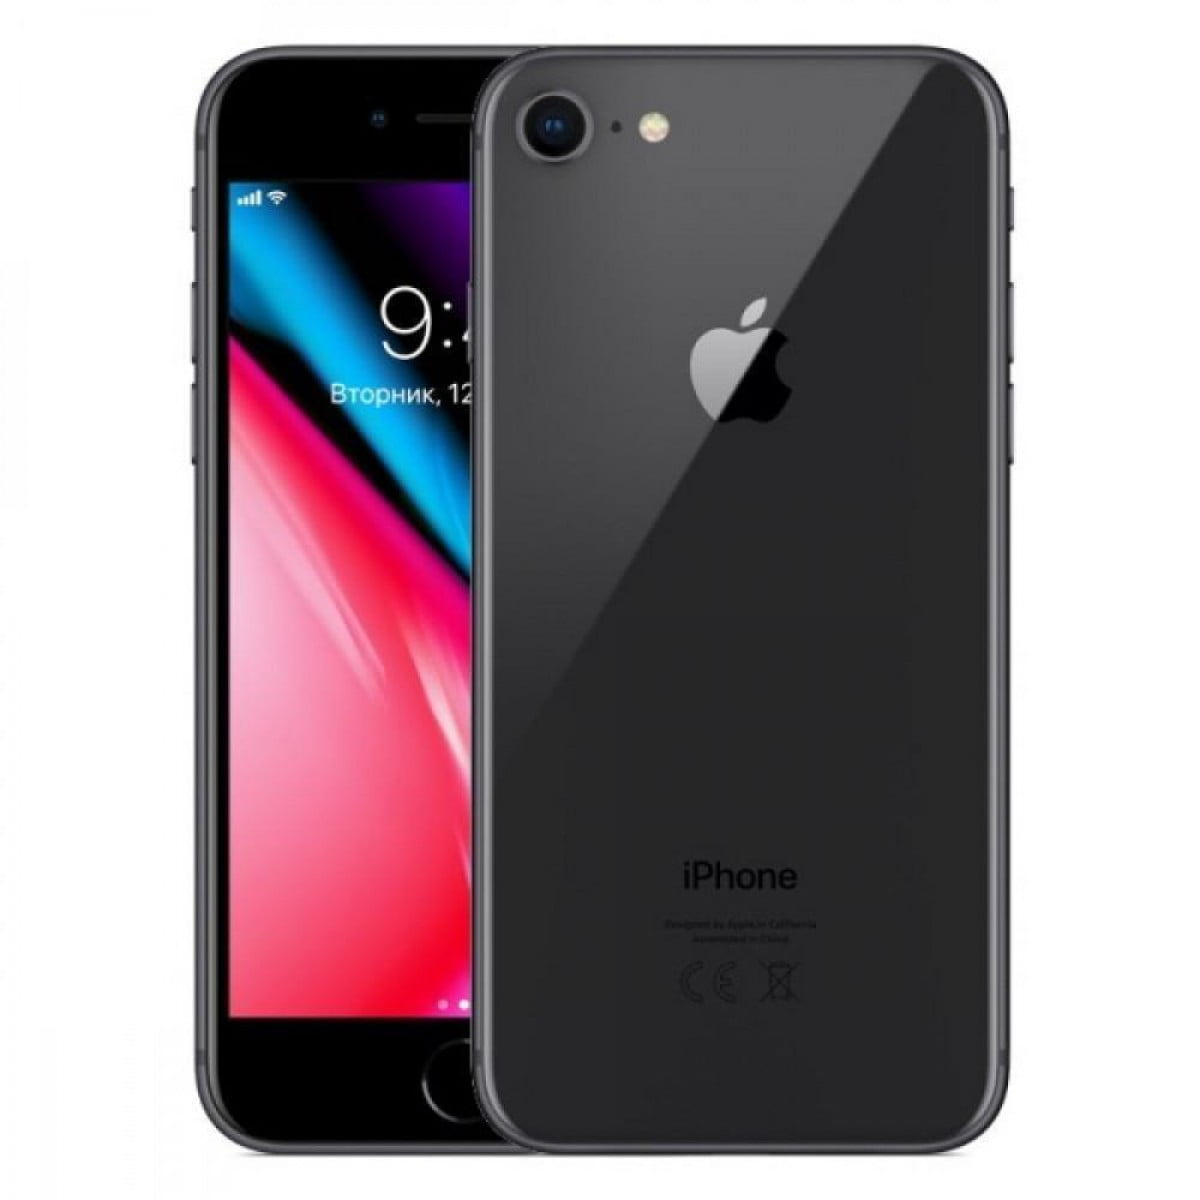 iPhone Space Gray 64 GB その他